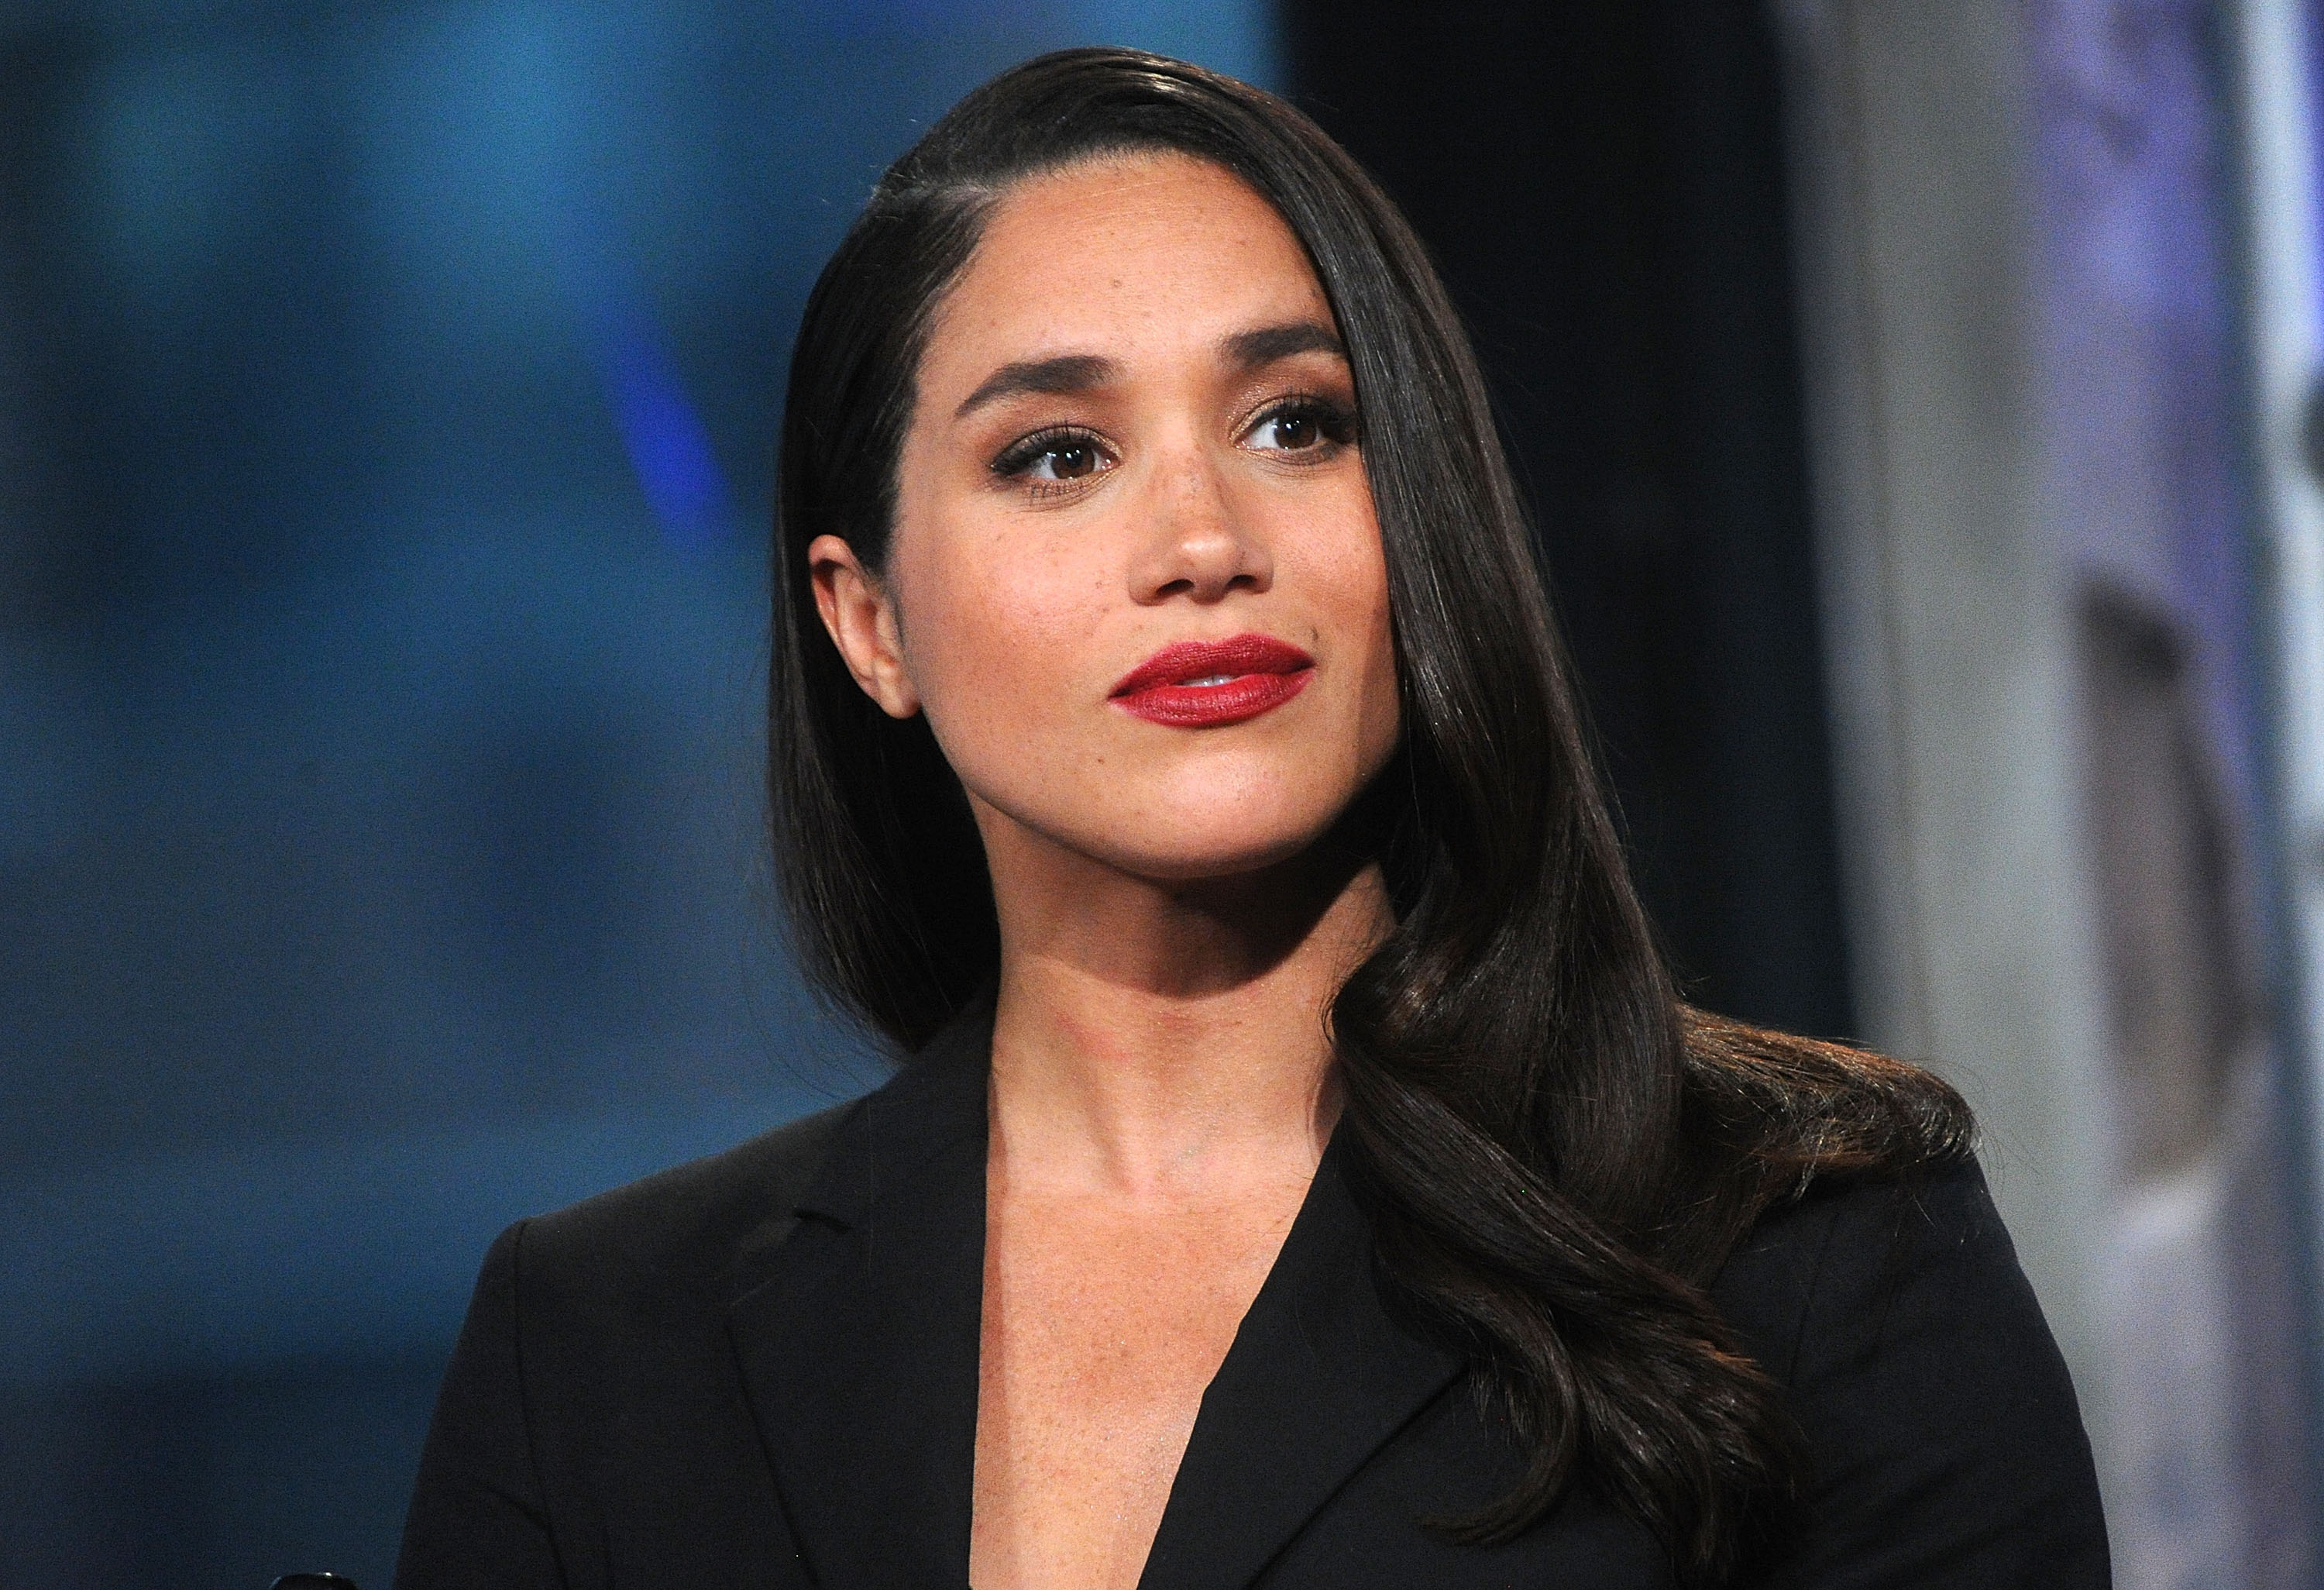 Meghan Markle attends AOL Build Presents "Suits" at AOL Studios In New York on March 17, 2016 in New York City | Photo: Getty Images